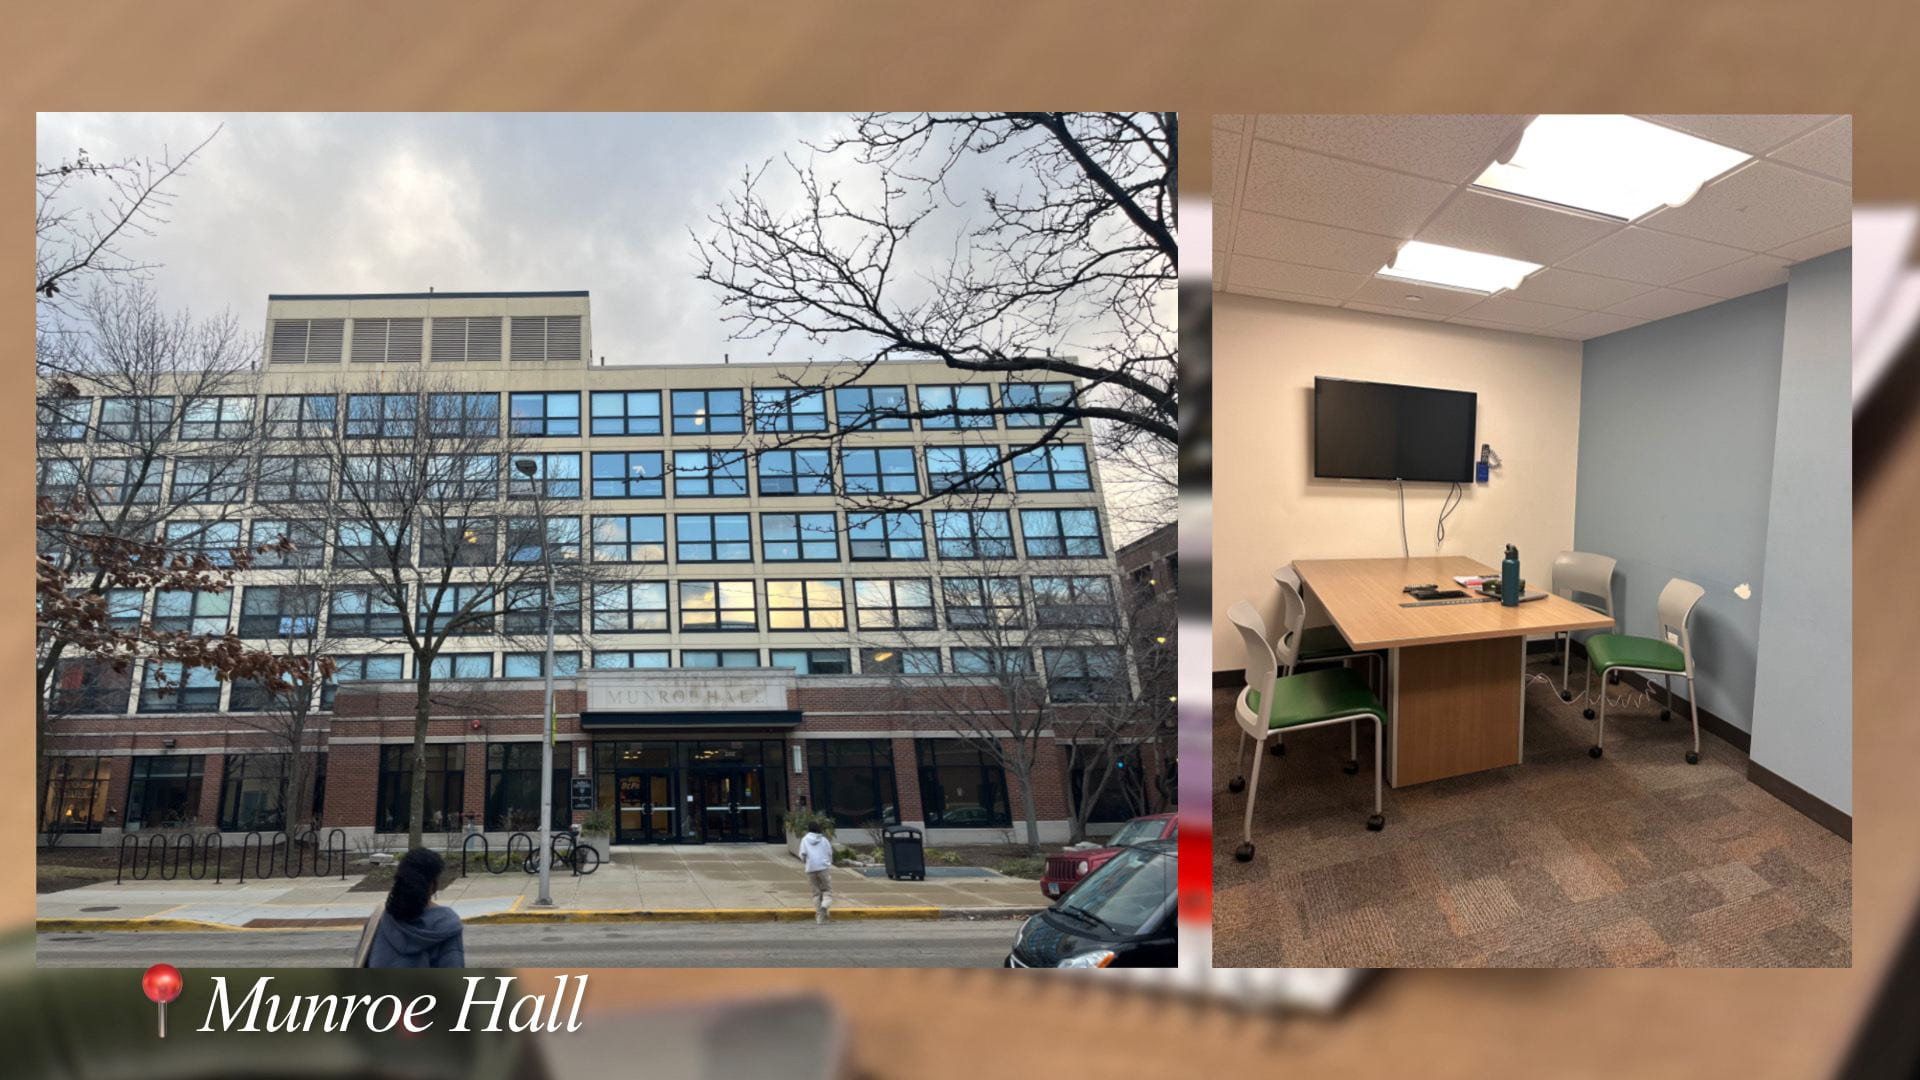  An image of a building (Munroe Hall) and an image of a study room.